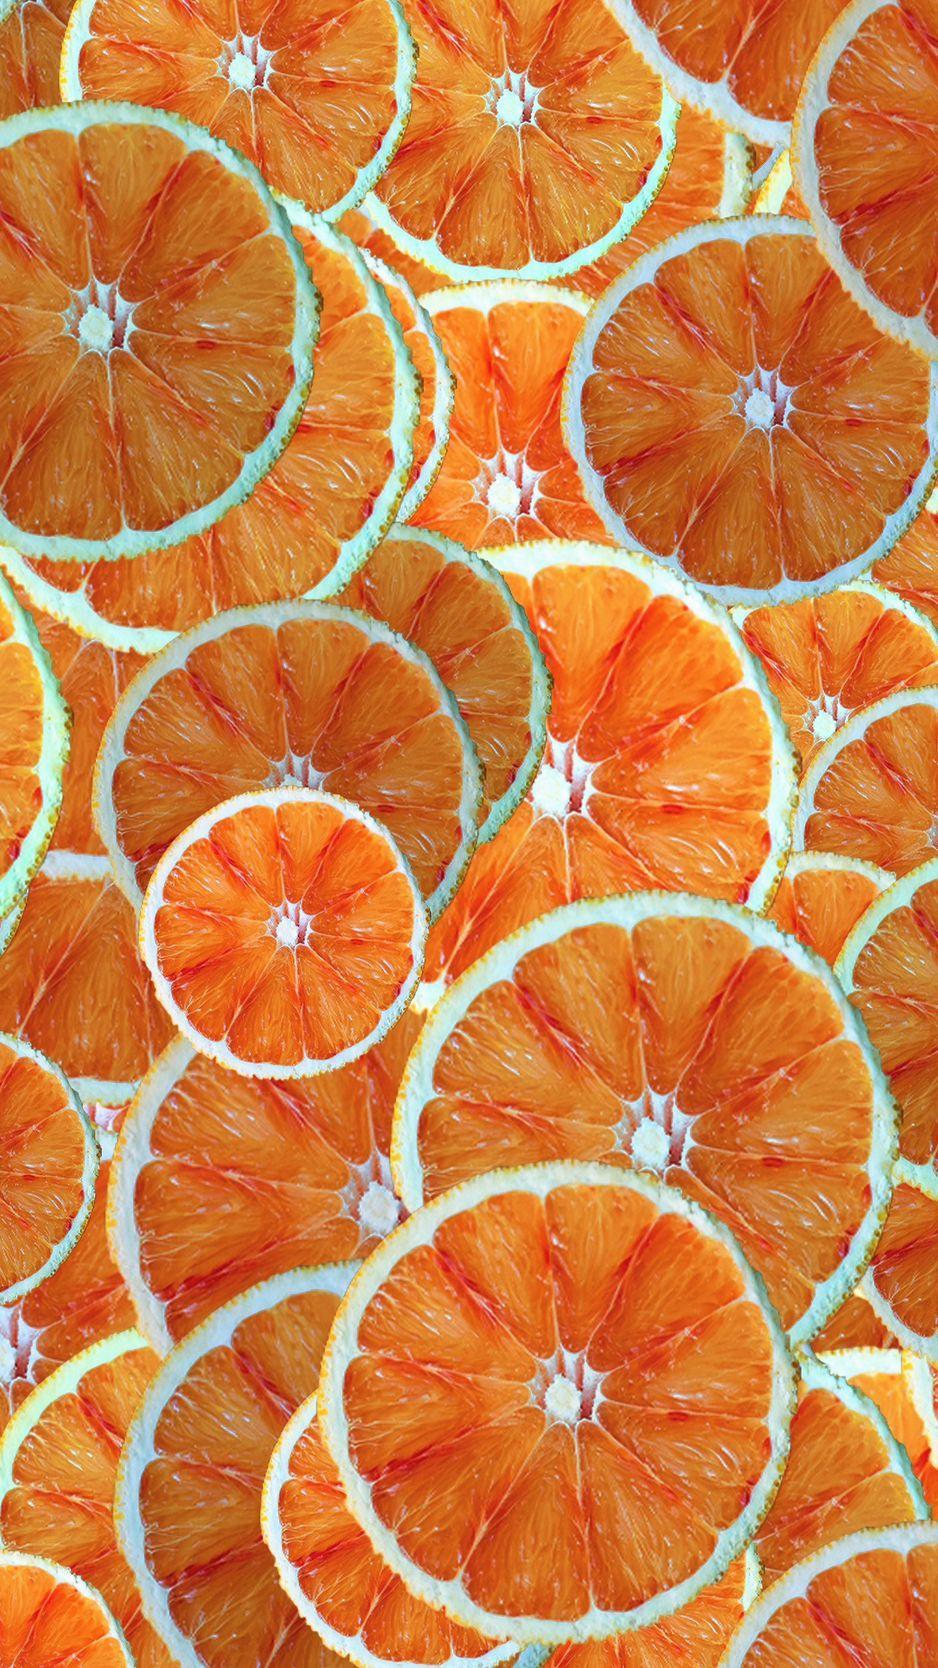 Fruit Iphone Wallpapers Top Free Fruit Iphone Backgrounds